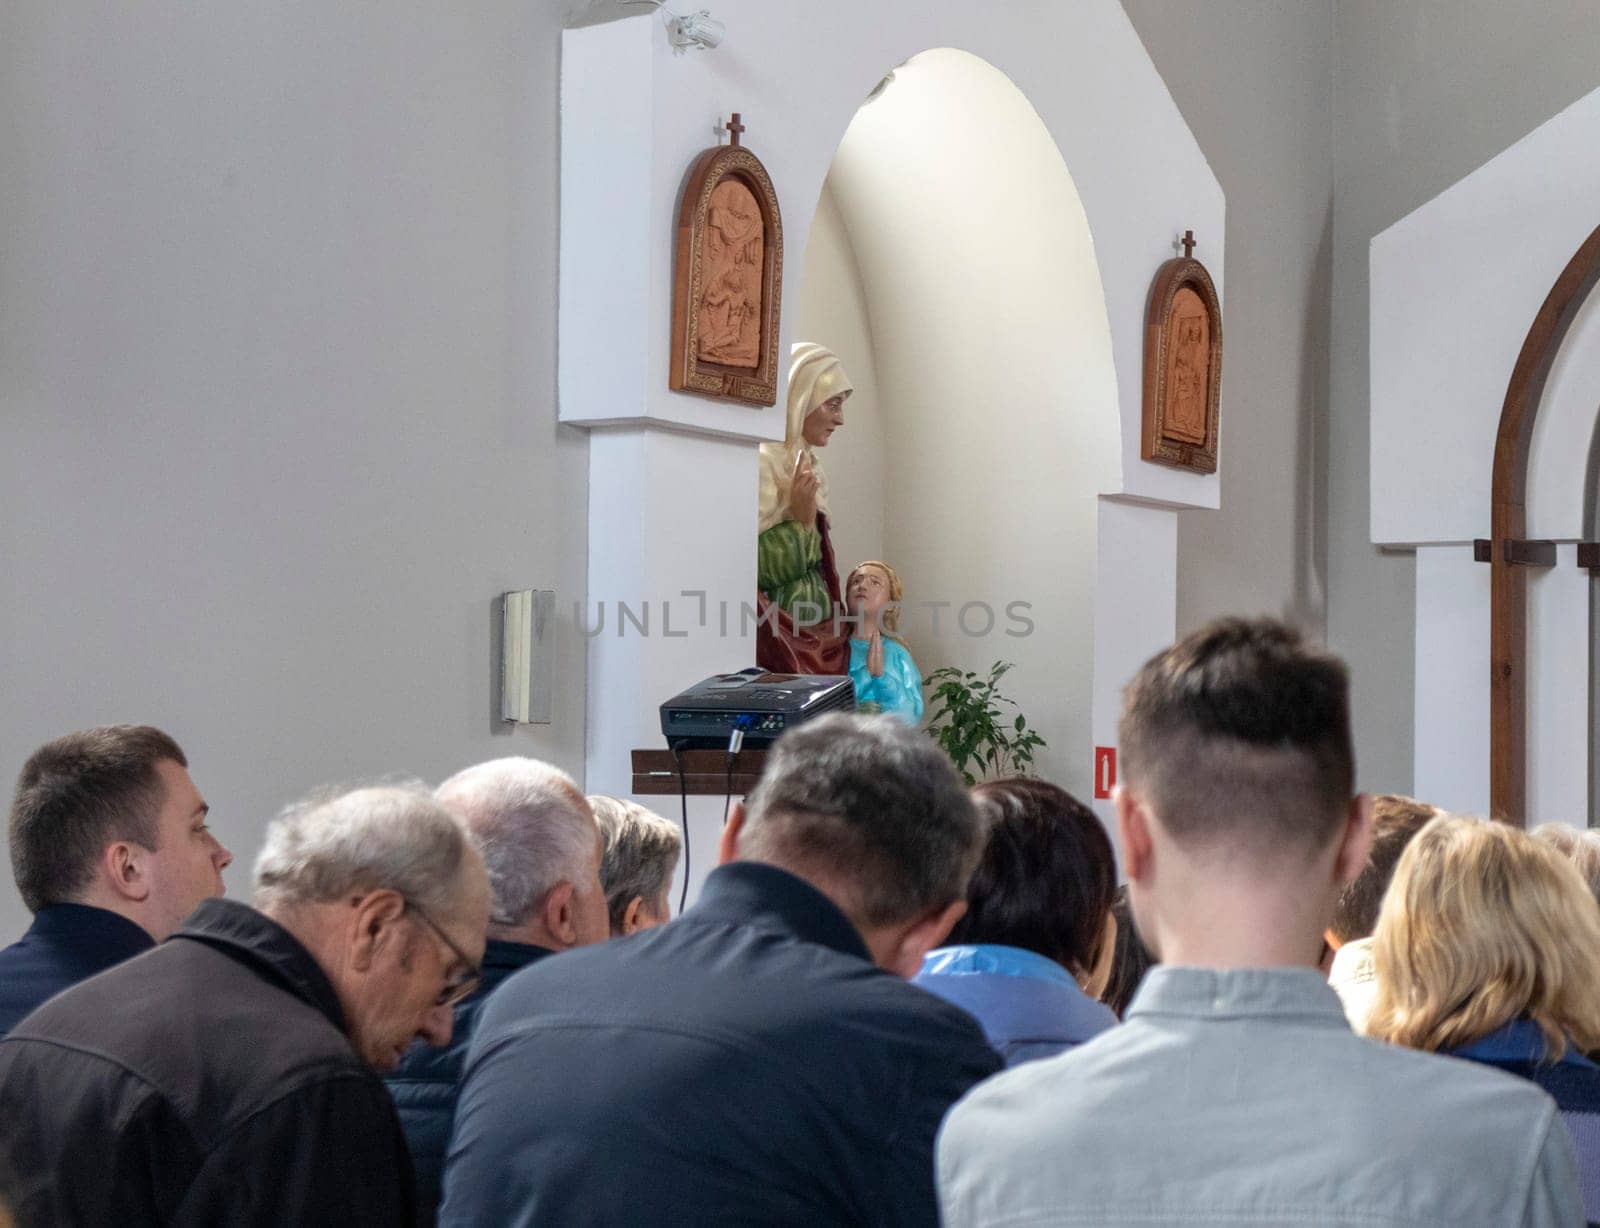 05.05.2024 - Brest, Belarus - People gathered for mass at Roman catholic church.